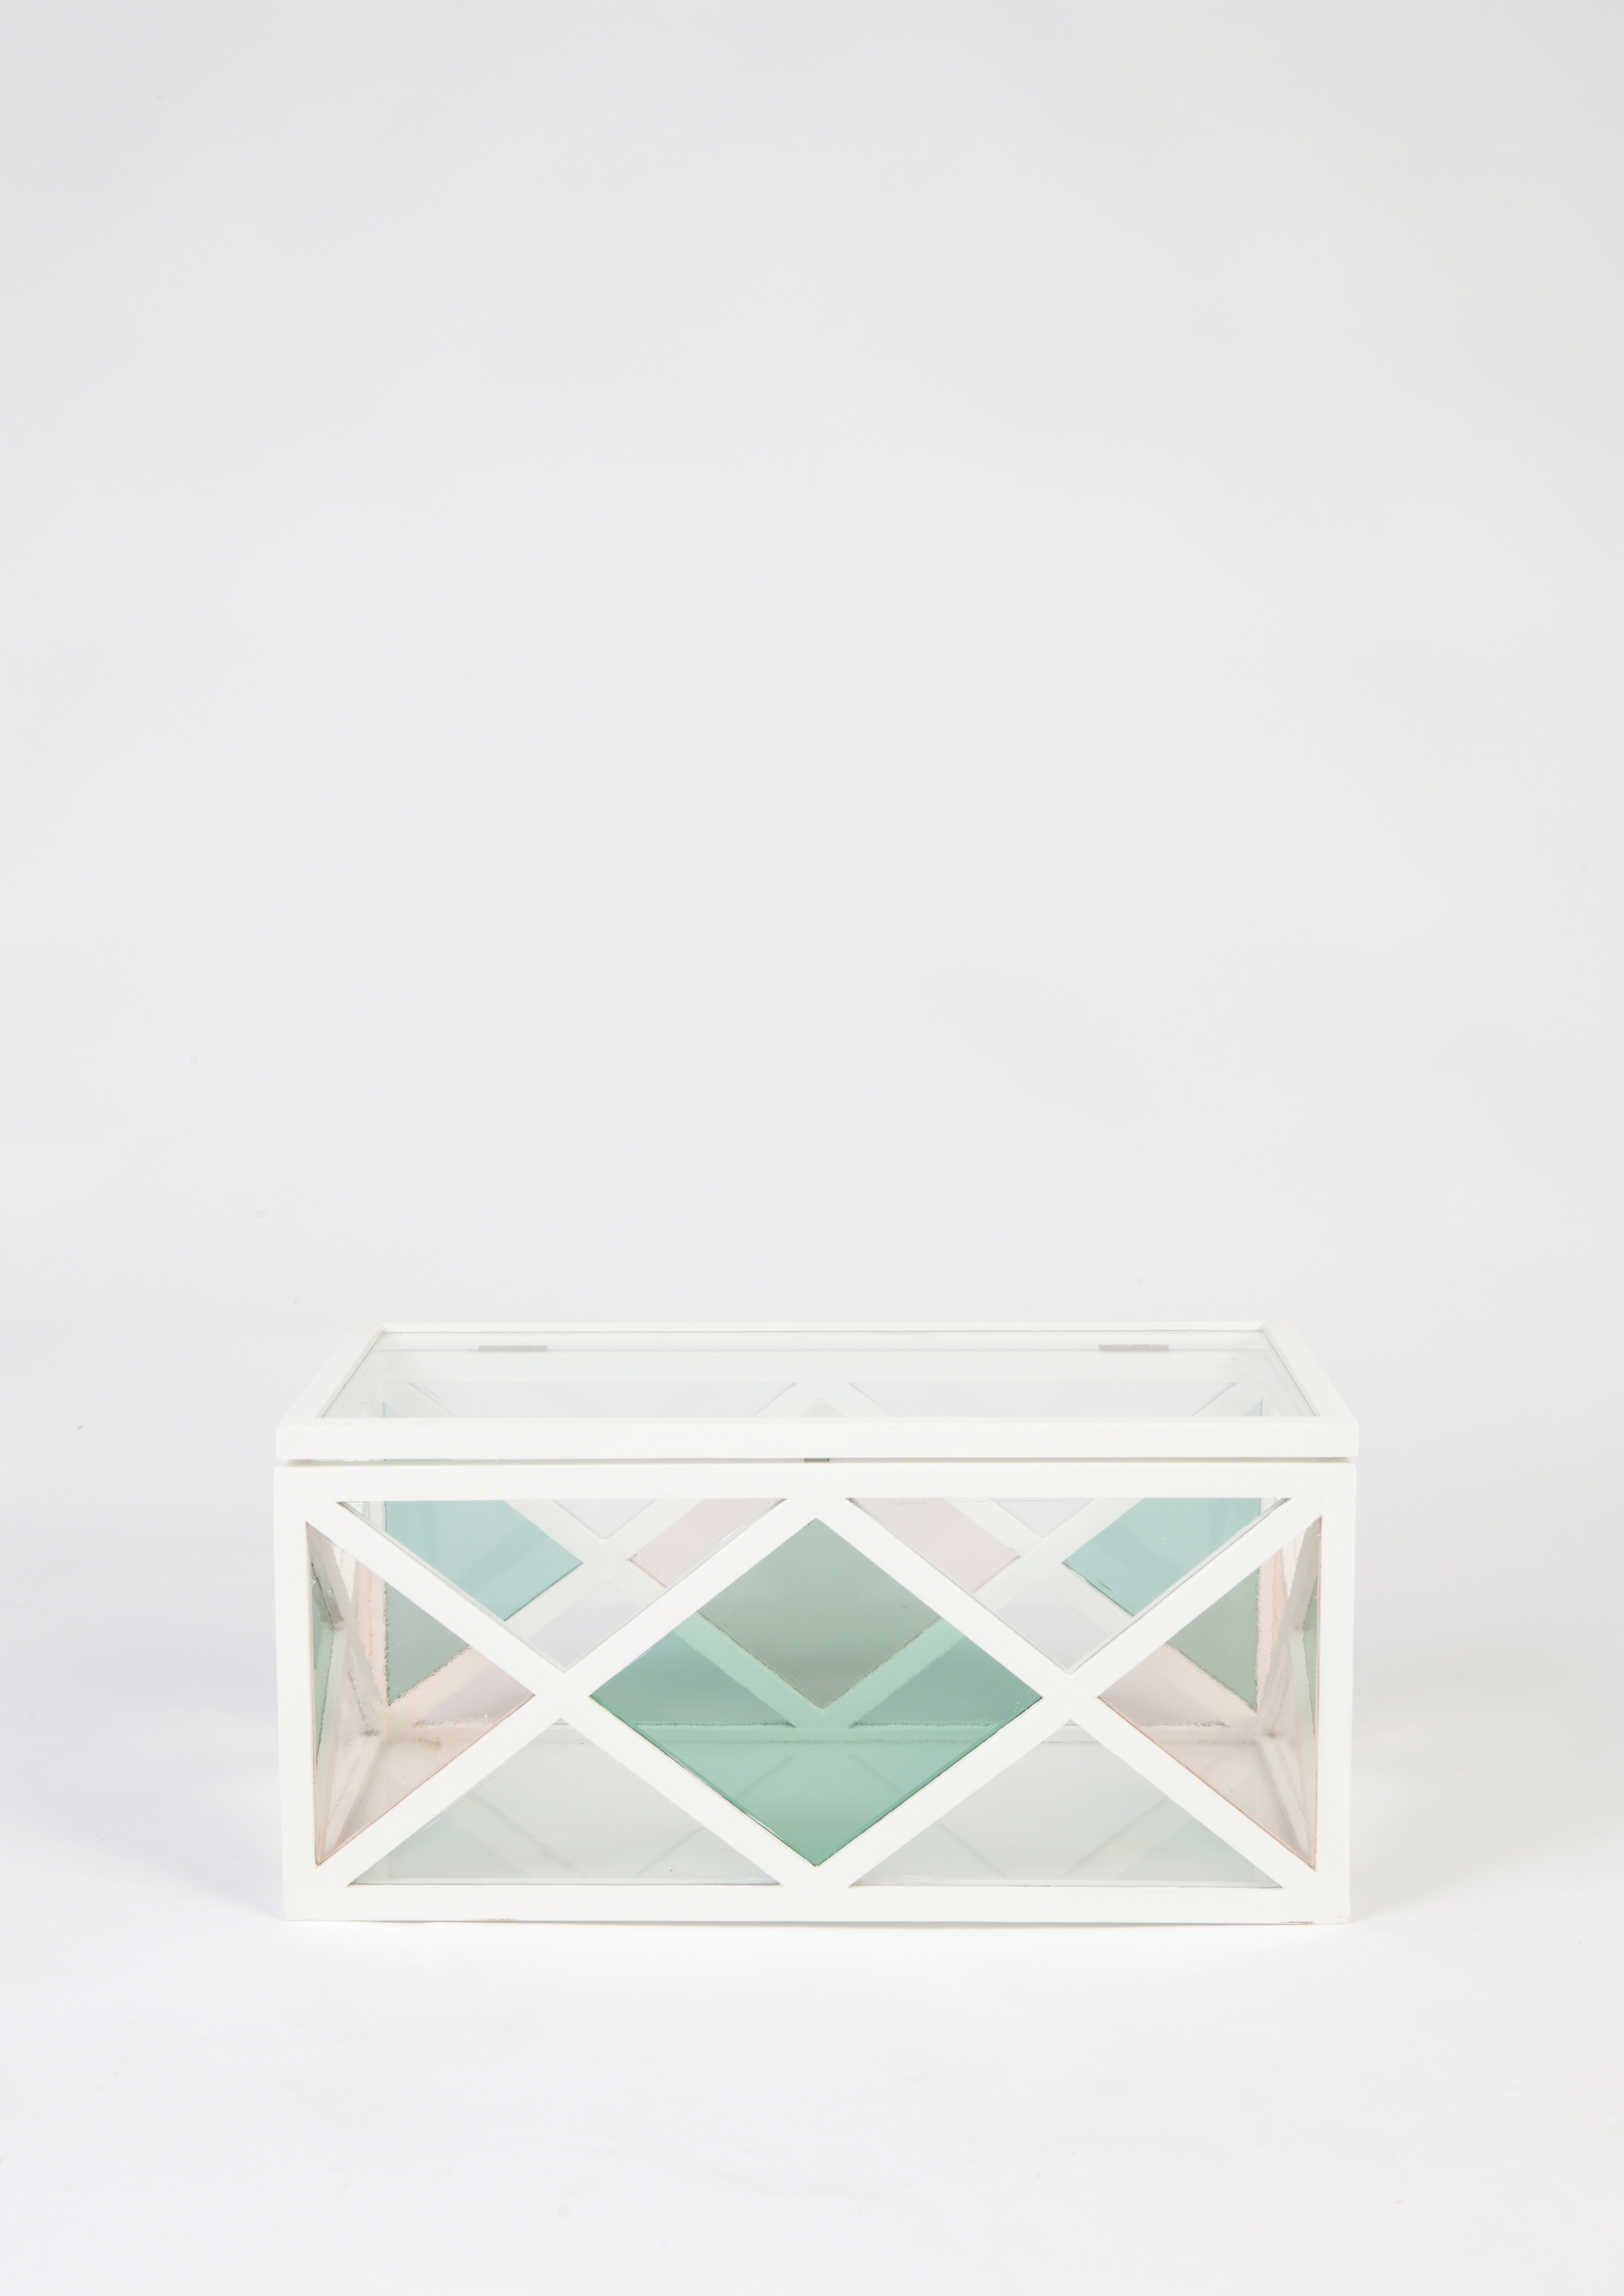 Molly Kyhl cabinet